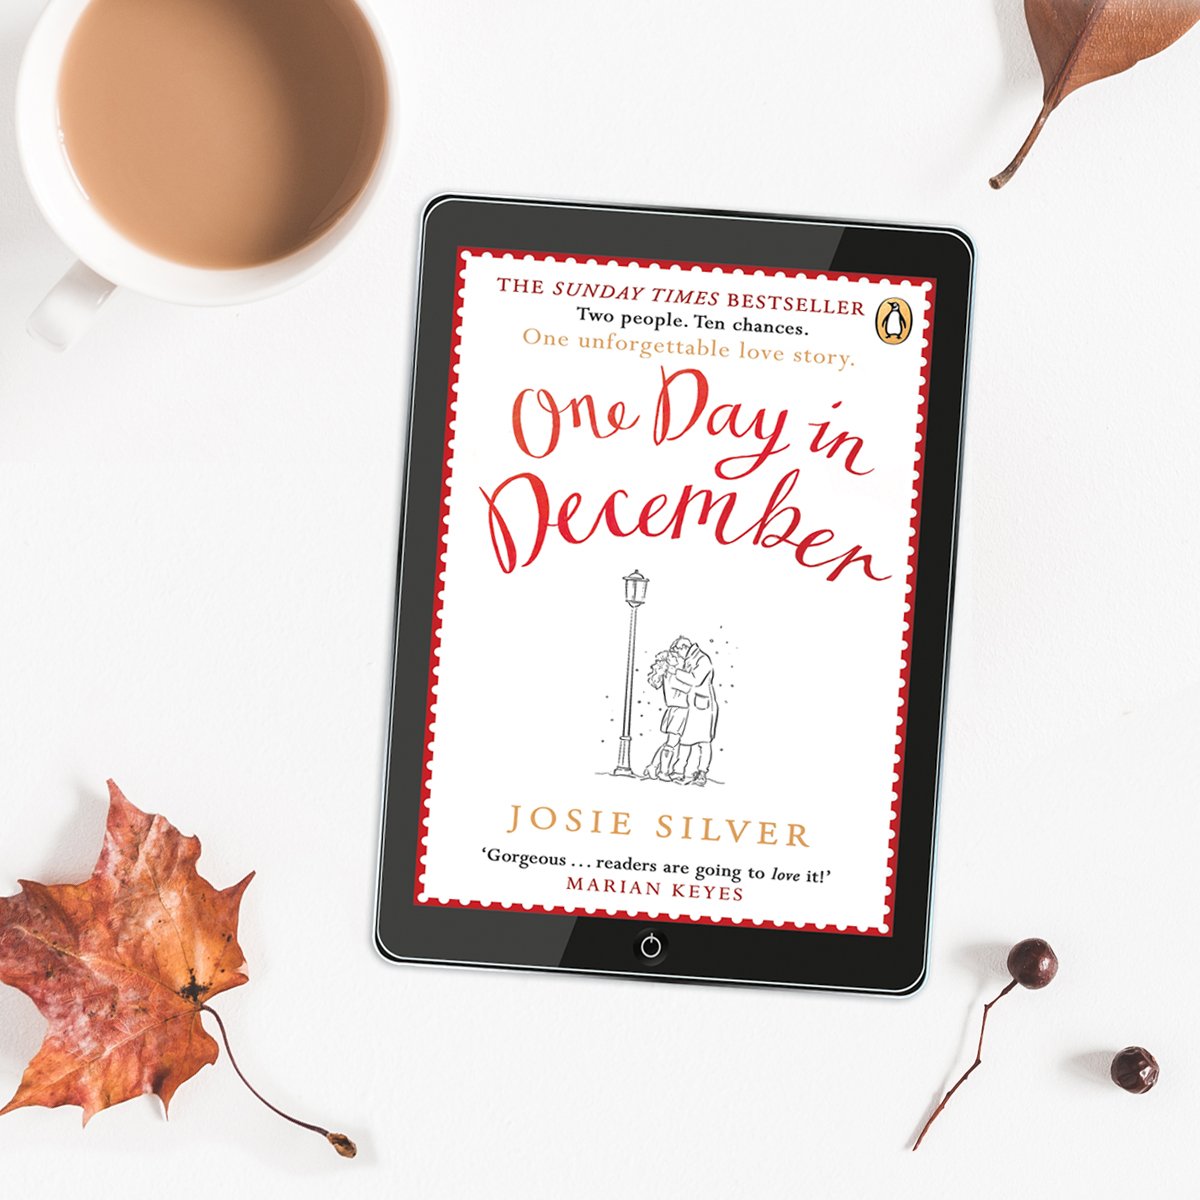 Enjoy the last burst of summer and get autumn-ready with this 99p ebook deal on #OneDayinDecember - bag this one while you can, offer ends today! This Sunday Times bestseller by @JosieSilver_ will give you all the festive feels 🍂❄️